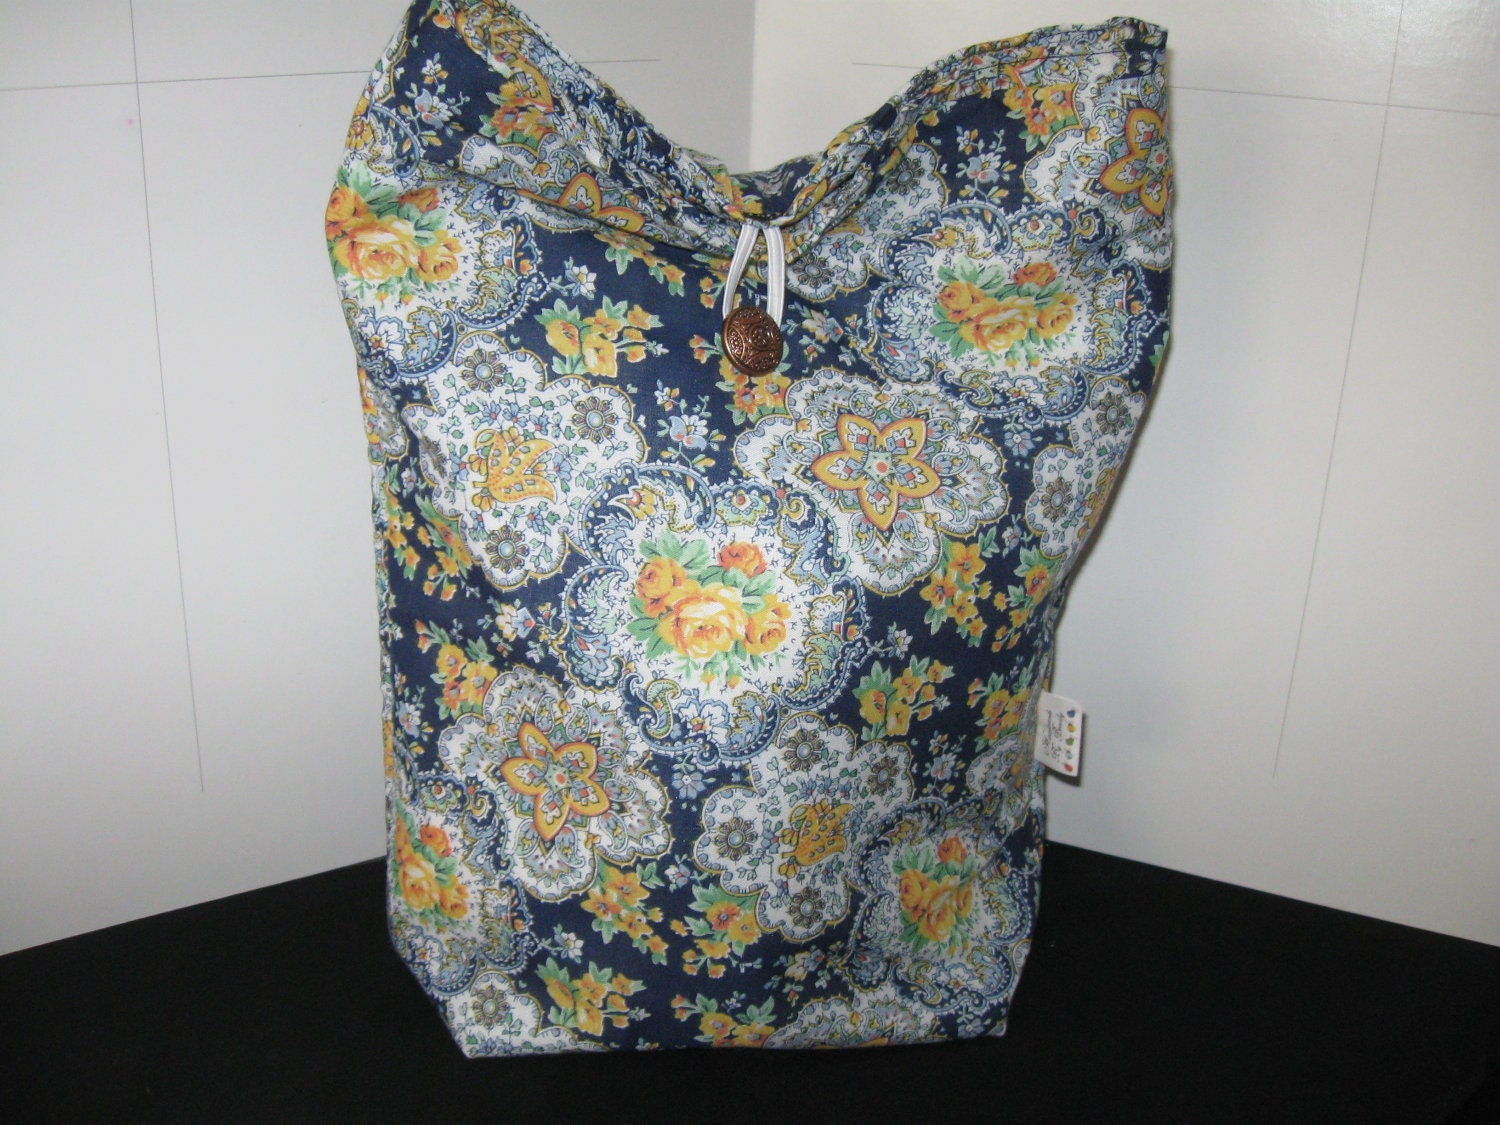 Go Green Extra Large Insulated Blue & Yellow Floral Print Lunchbag with Same Print inside All Cotton Reusable lunchbag or lunch sack